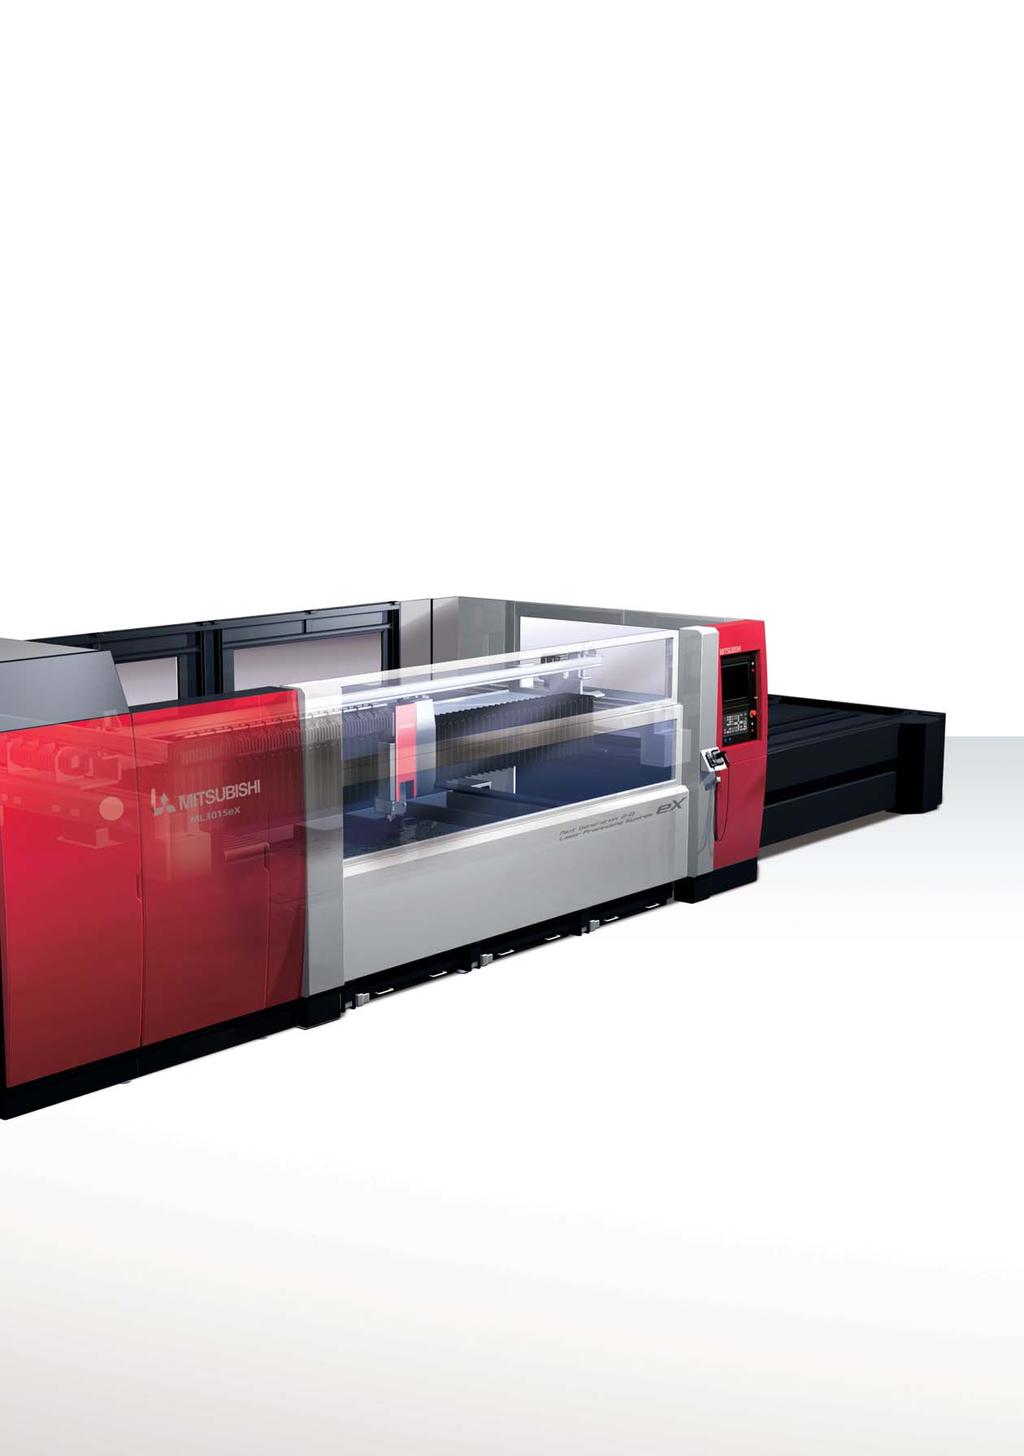 Machine High-speed, High-stability Processing Machine Resonator SD Excitation 3-Axis Cross Flow Resonator Key Technologies Ensuring High Stability and High Productivity Mitsubishi Electric s